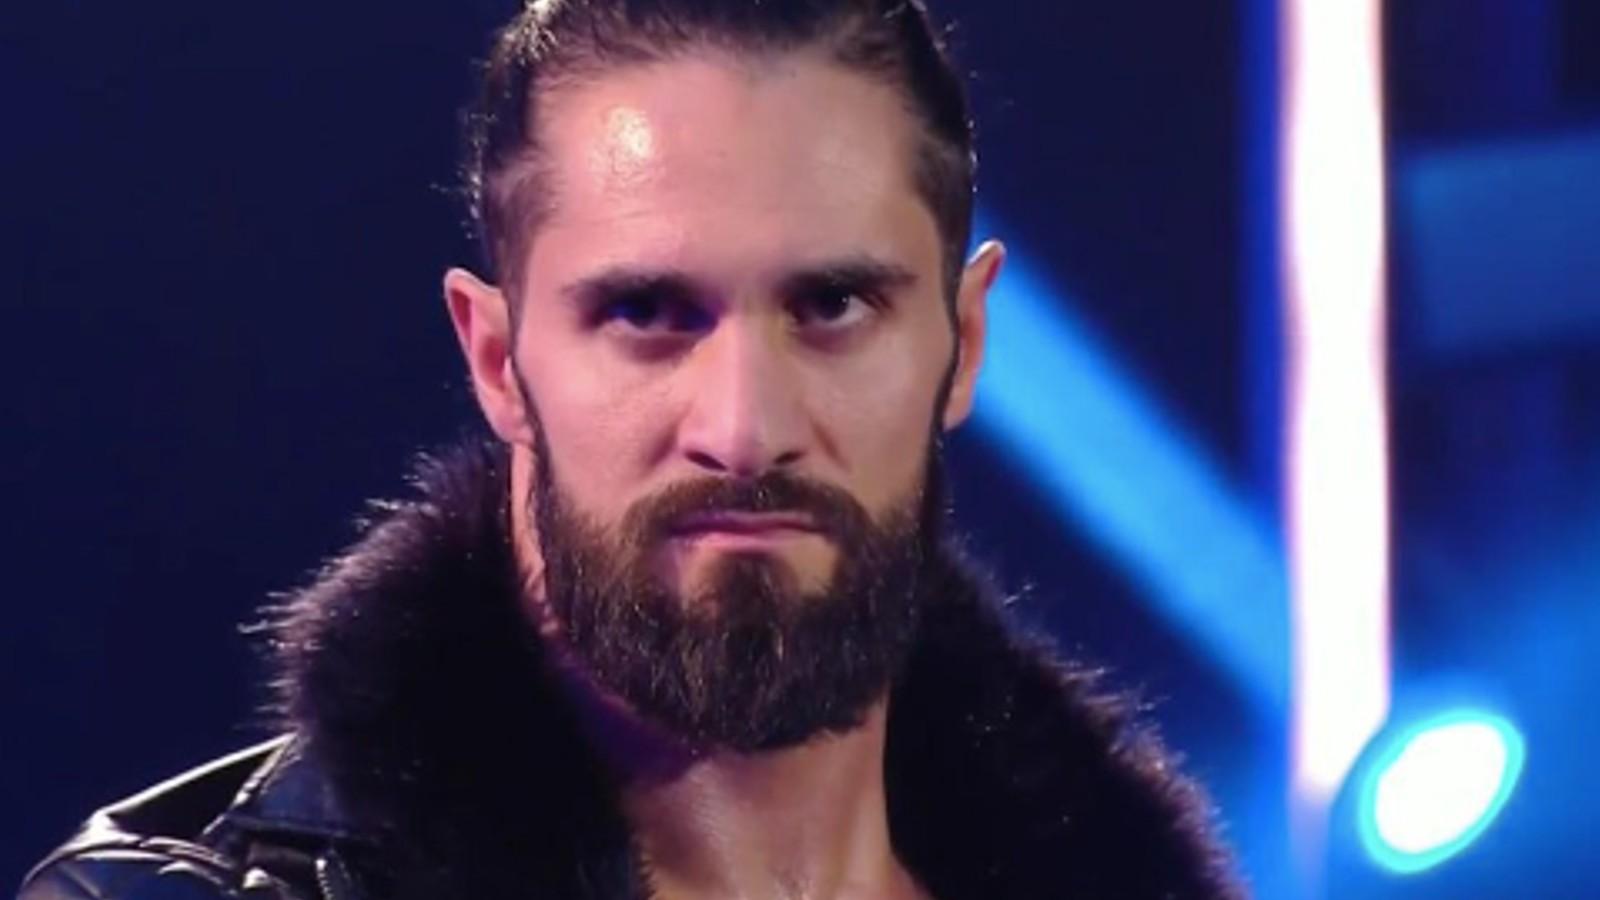 A close up of Seth Rollins before he wrestles during WWE Raw